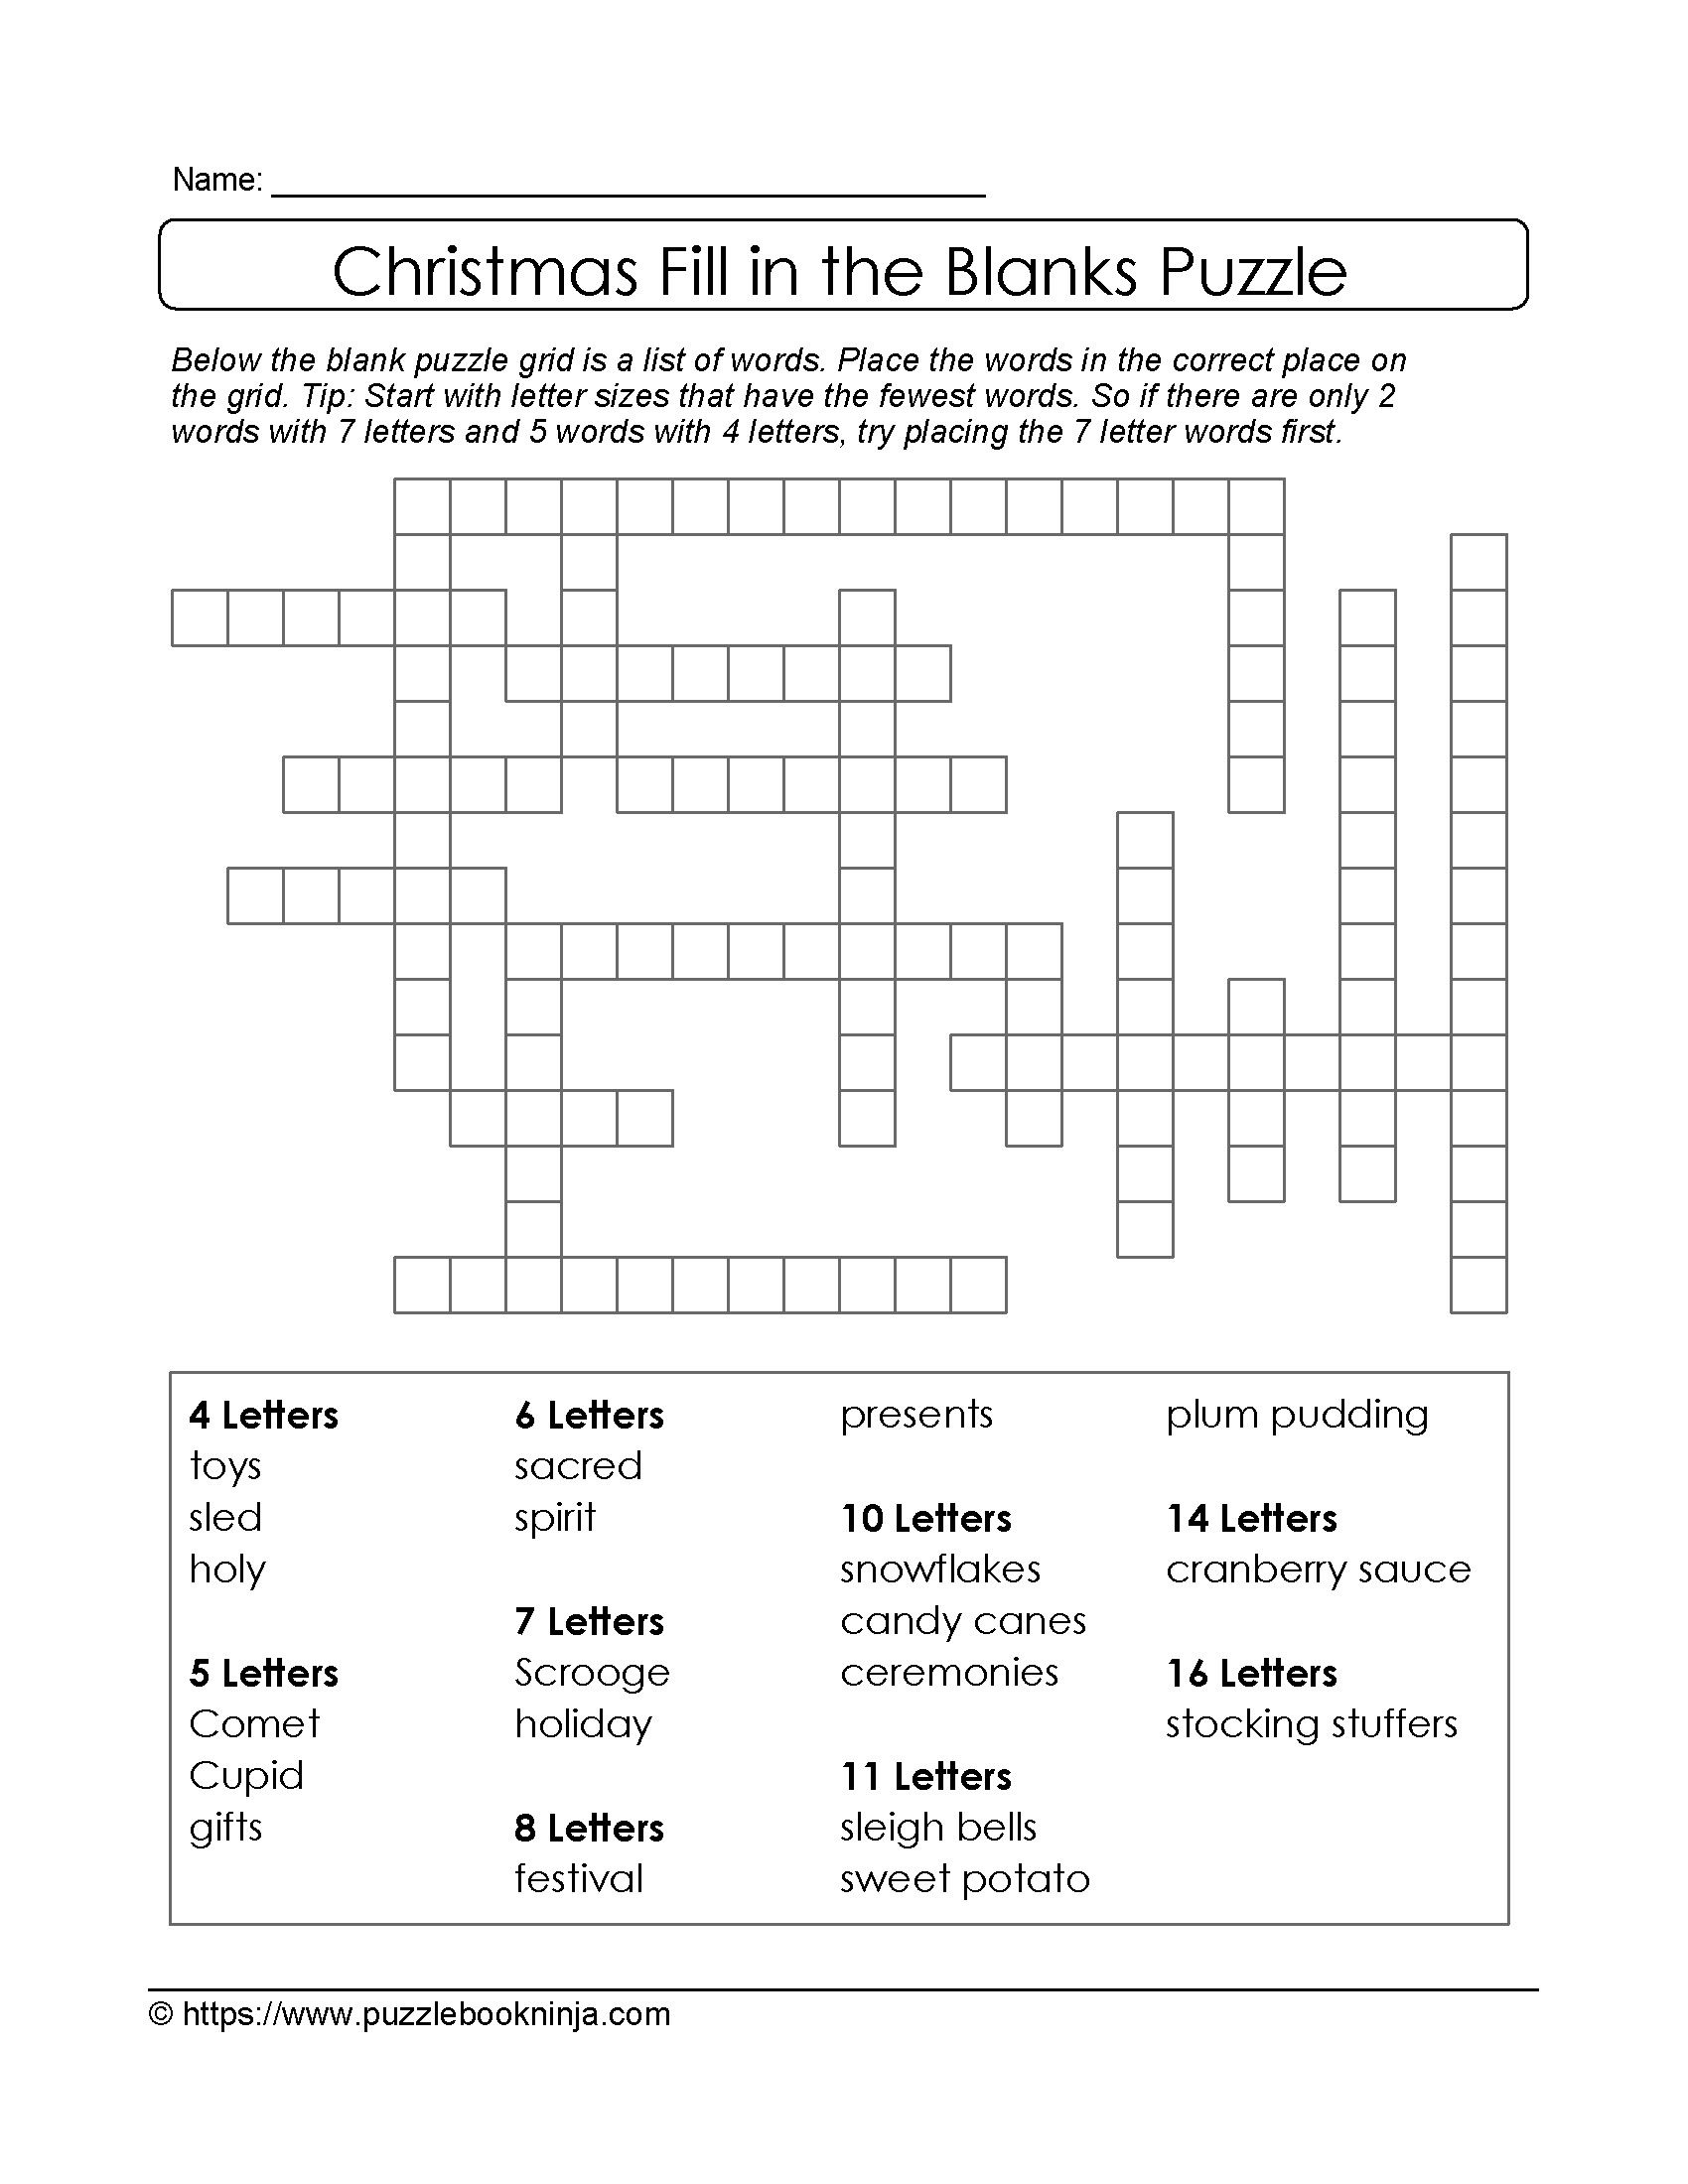 Puzzles To Print. Free Xmas Theme Fill In The Blanks Puzzle - Printable Puzzle Christmas